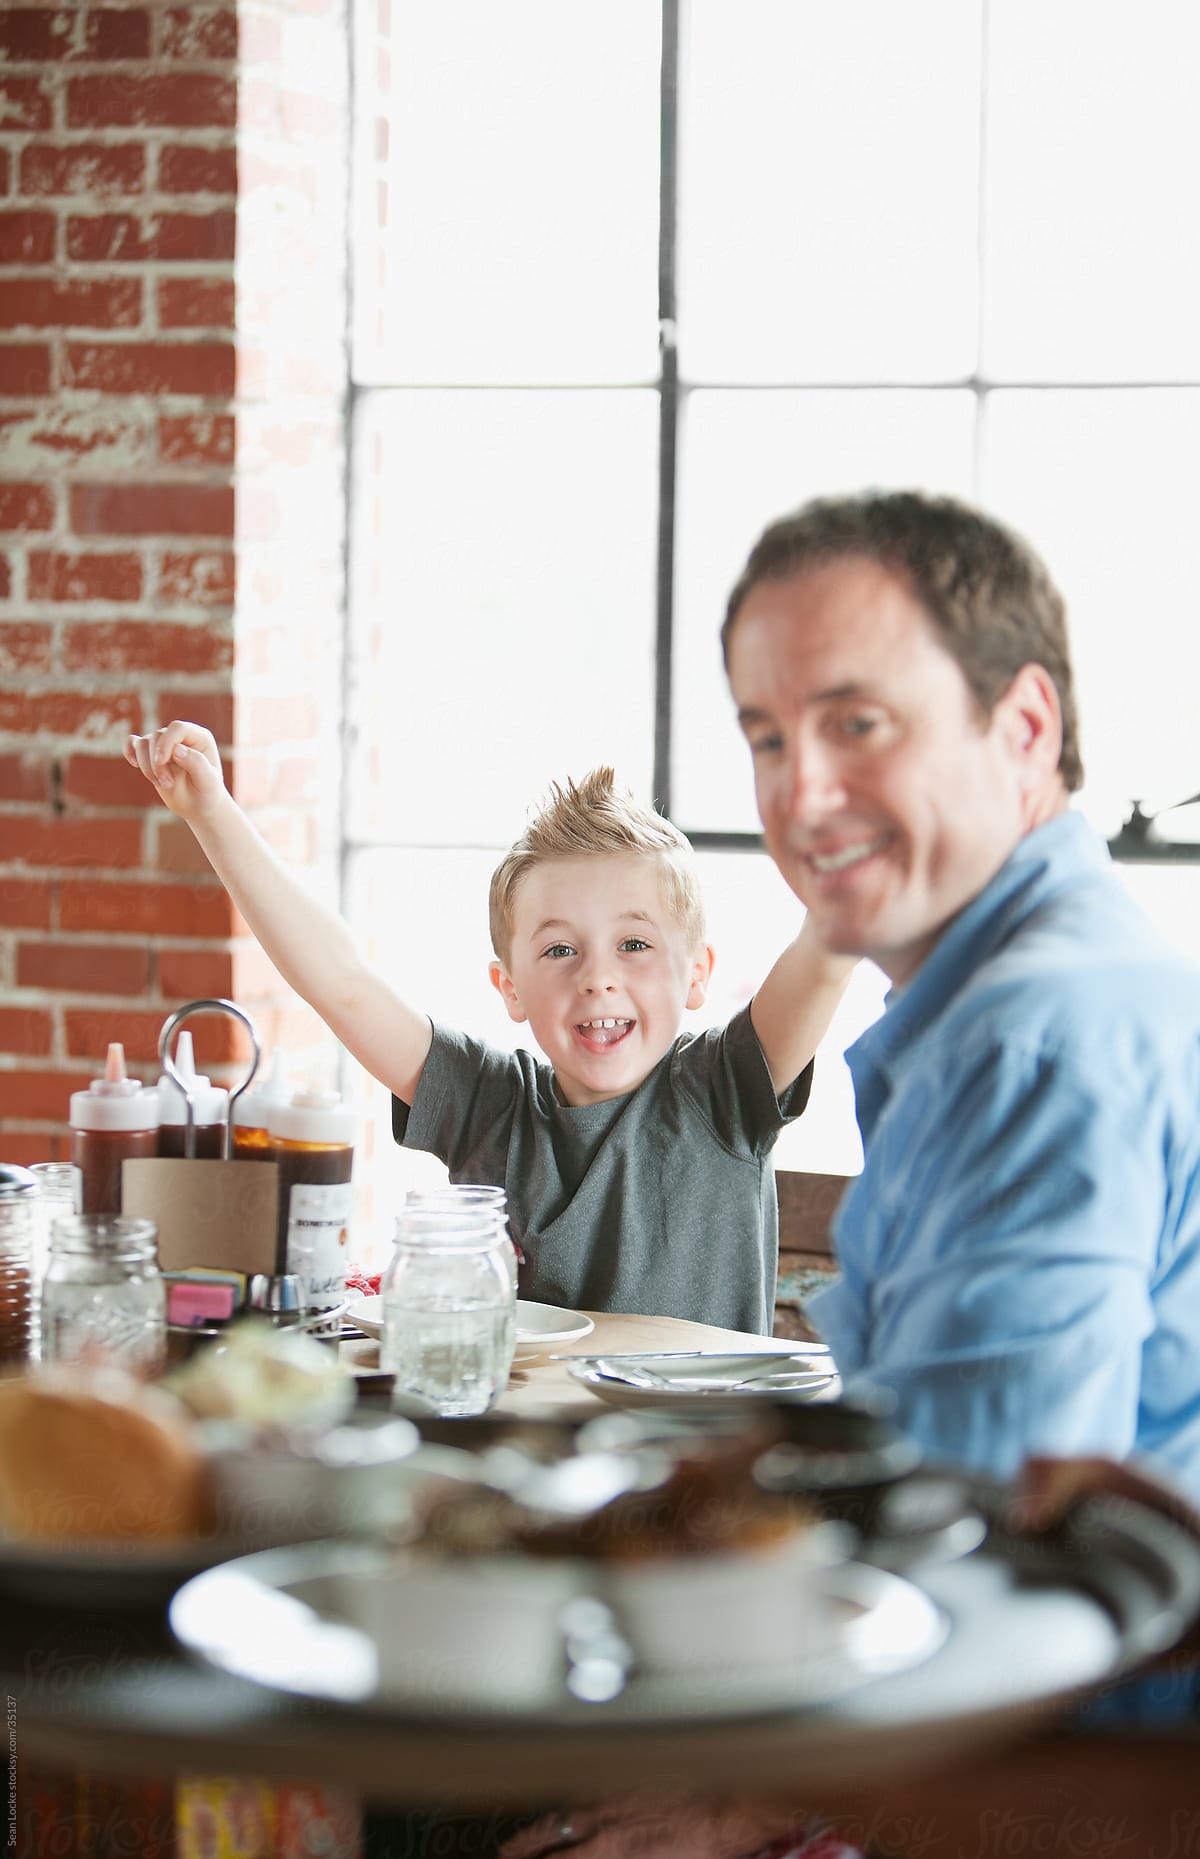 Barbeque: Child Cheers as Server Brings Food